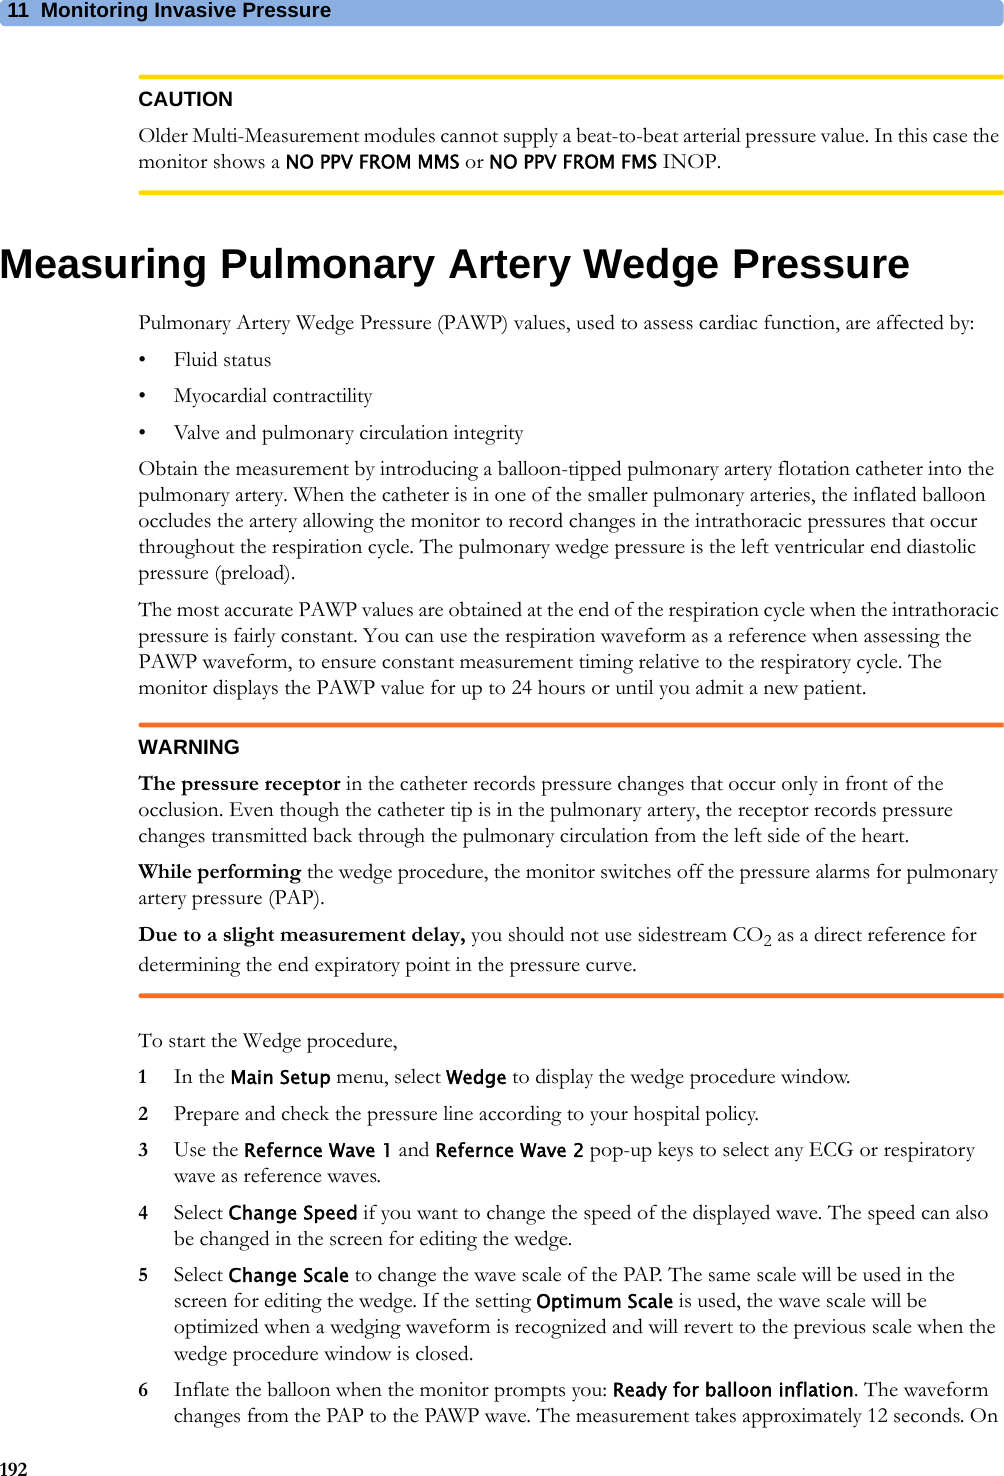 11 Monitoring Invasive Pressure192CAUTIONOlder Multi-Measurement modules cannot supply a beat-to-beat arterial pressure value. In this case the monitor shows a NO PPV FROM MMS or NO PPV FROM FMS INOP.Measuring Pulmonary Artery Wedge PressurePulmonary Artery Wedge Pressure (PAWP) values, used to assess cardiac function, are affected by:• Fluid status• Myocardial contractility• Valve and pulmonary circulation integrityObtain the measurement by introducing a balloon-tipped pulmonary artery flotation catheter into the pulmonary artery. When the catheter is in one of the smaller pulmonary arteries, the inflated balloon occludes the artery allowing the monitor to record changes in the intrathoracic pressures that occur throughout the respiration cycle. The pulmonary wedge pressure is the left ventricular end diastolic pressure (preload).The most accurate PAWP values are obtained at the end of the respiration cycle when the intrathoracic pressure is fairly constant. You can use the respiration waveform as a reference when assessing the PAWP waveform, to ensure constant measurement timing relative to the respiratory cycle. The monitor displays the PAWP value for up to 24 hours or until you admit a new patient.WARNINGThe pressure receptor in the catheter records pressure changes that occur only in front of the occlusion. Even though the catheter tip is in the pulmonary artery, the receptor records pressure changes transmitted back through the pulmonary circulation from the left side of the heart.While performing the wedge procedure, the monitor switches off the pressure alarms for pulmonary artery pressure (PAP).Due to a slight measurement delay, you should not use sidestream CO2 as a direct reference for determining the end expiratory point in the pressure curve.To start the Wedge procedure,1In the Main Setup menu, select Wedge to display the wedge procedure window.2Prepare and check the pressure line according to your hospital policy.3Use the Refernce Wave 1 and Refernce Wave 2 pop-up keys to select any ECG or respiratory wave as reference waves.4Select Change Speed if you want to change the speed of the displayed wave. The speed can also be changed in the screen for editing the wedge.5Select Change Scale to change the wave scale of the PAP. The same scale will be used in the screen for editing the wedge. If the setting Optimum Scale is used, the wave scale will be optimized when a wedging waveform is recognized and will revert to the previous scale when the wedge procedure window is closed.6Inflate the balloon when the monitor prompts you: Ready for balloon inflation. The waveform changes from the PAP to the PAWP wave. The measurement takes approximately 12 seconds. On 